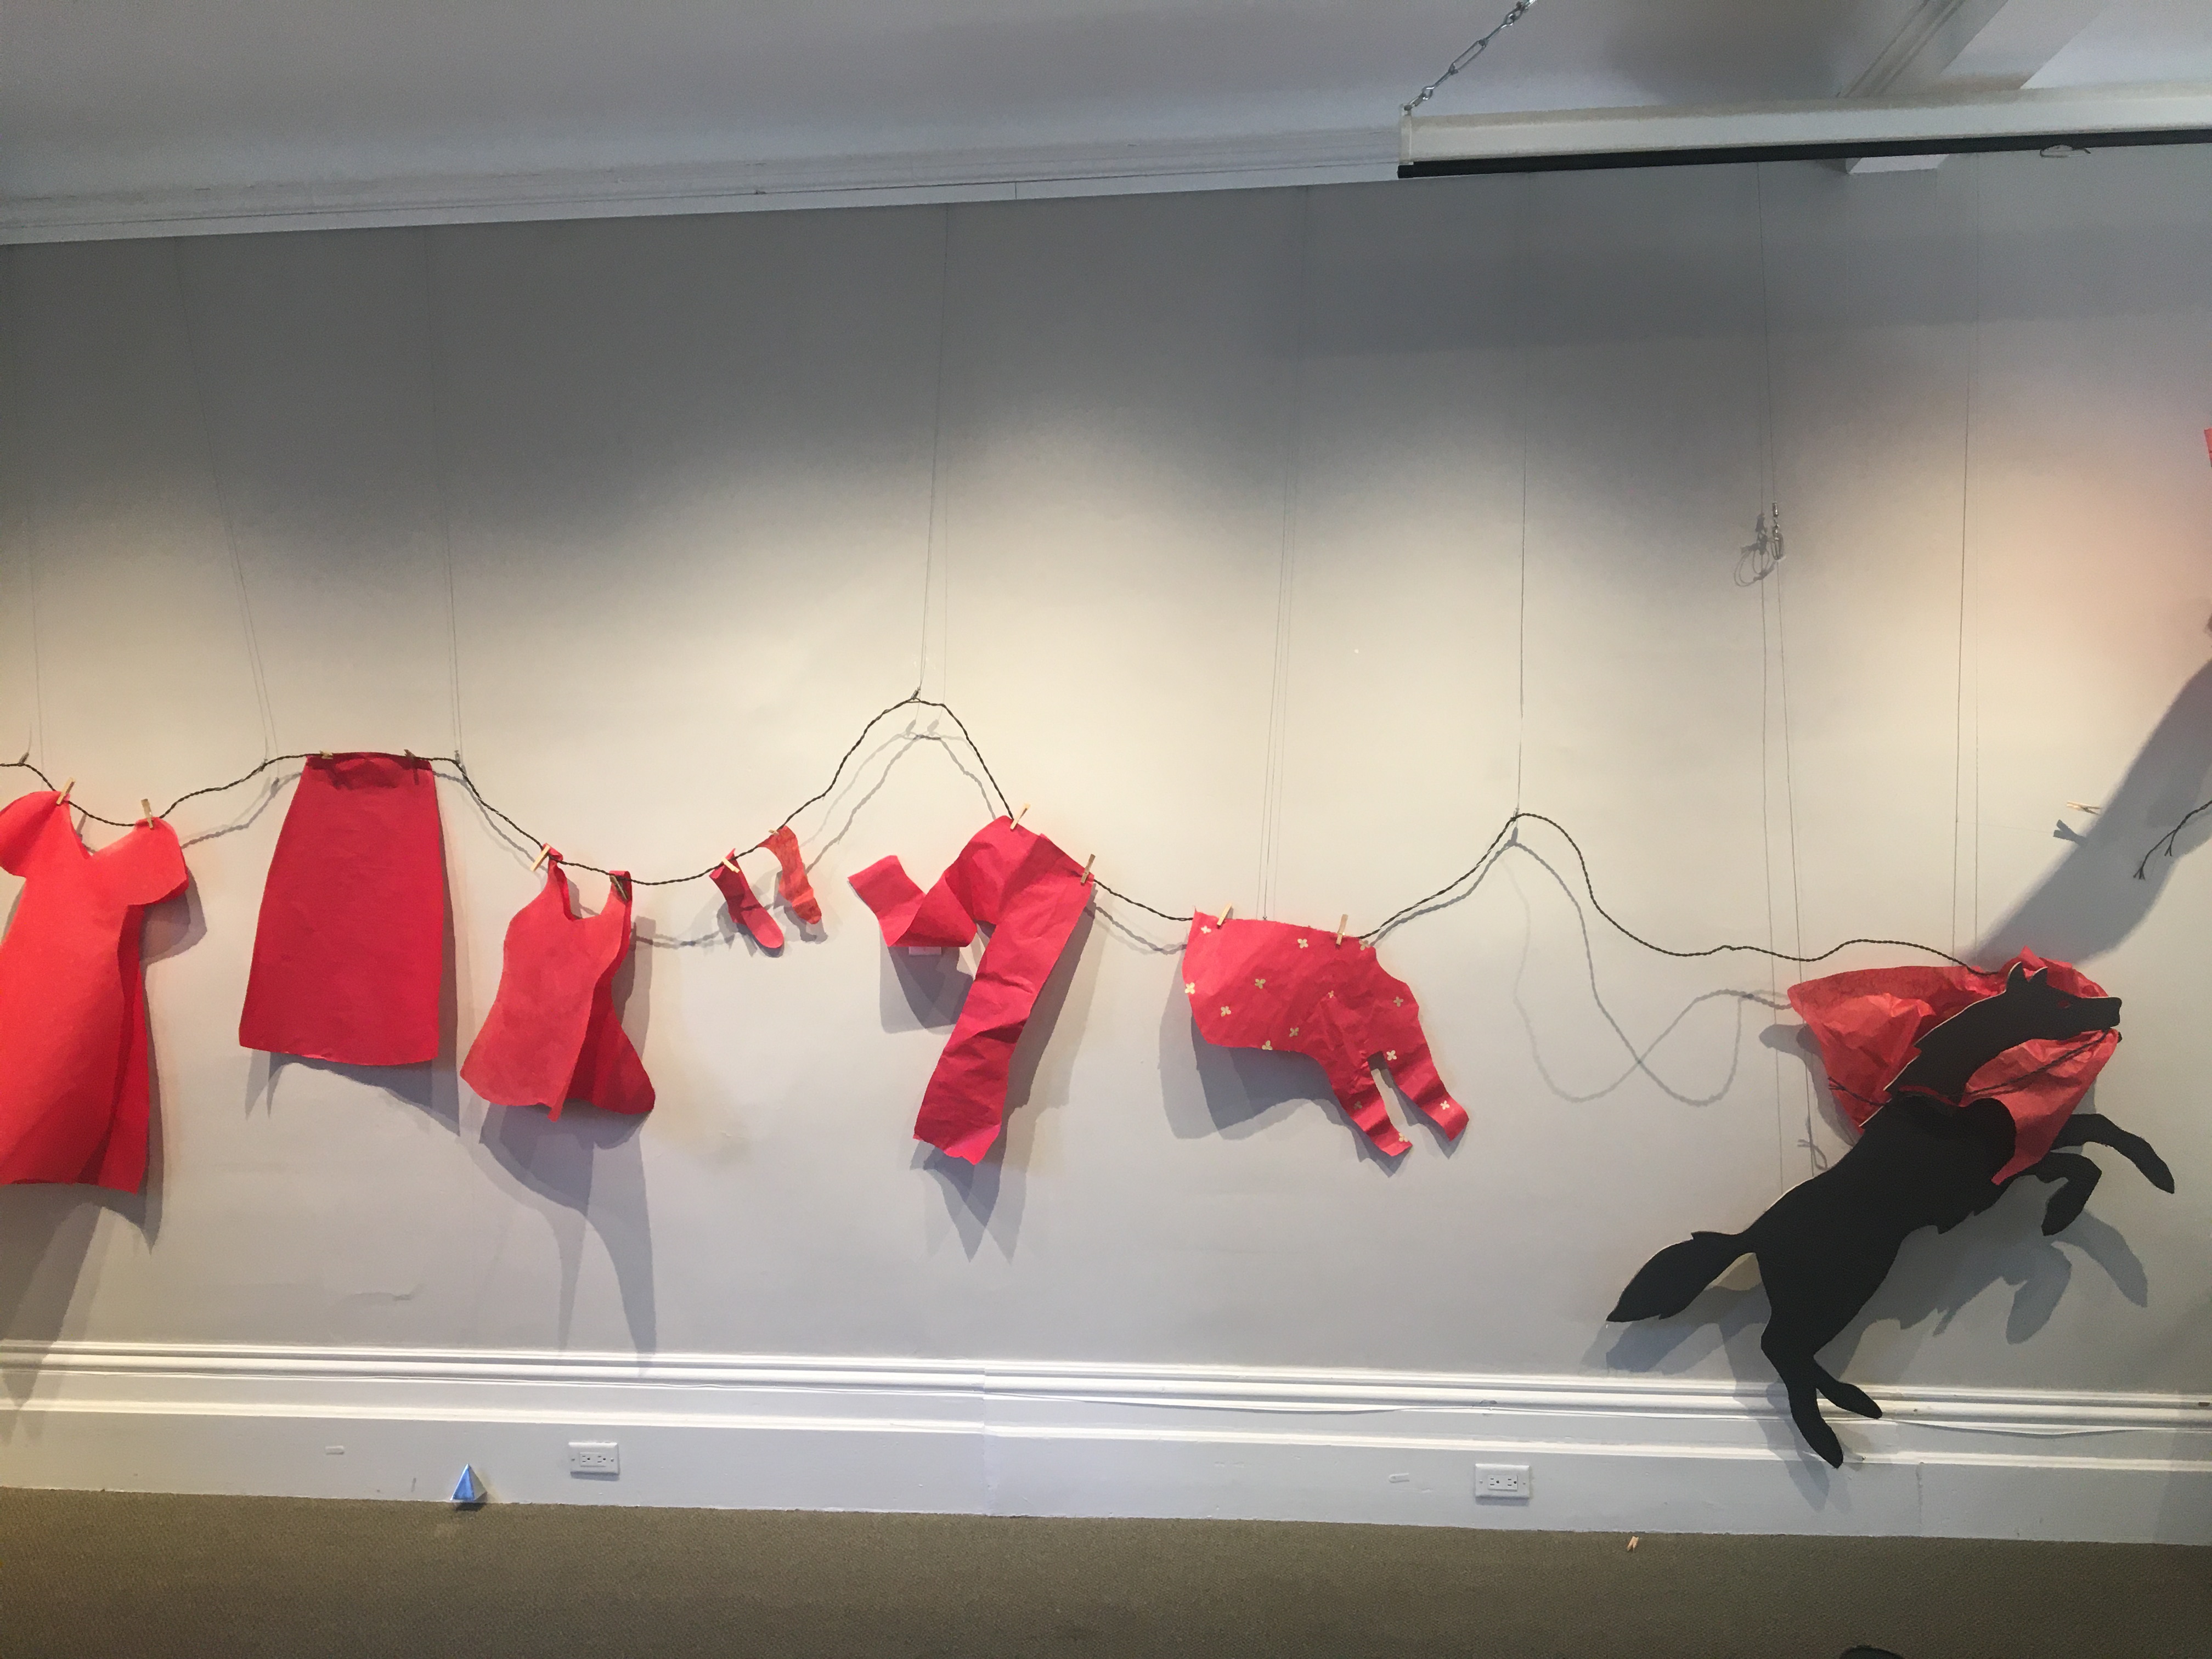 A wire serves as a clothes line with red paper cut-outs of pants, shirts and dresses hang along it.  At the end is a black silhouette of a wolf lunging with a red dress in its mouth.